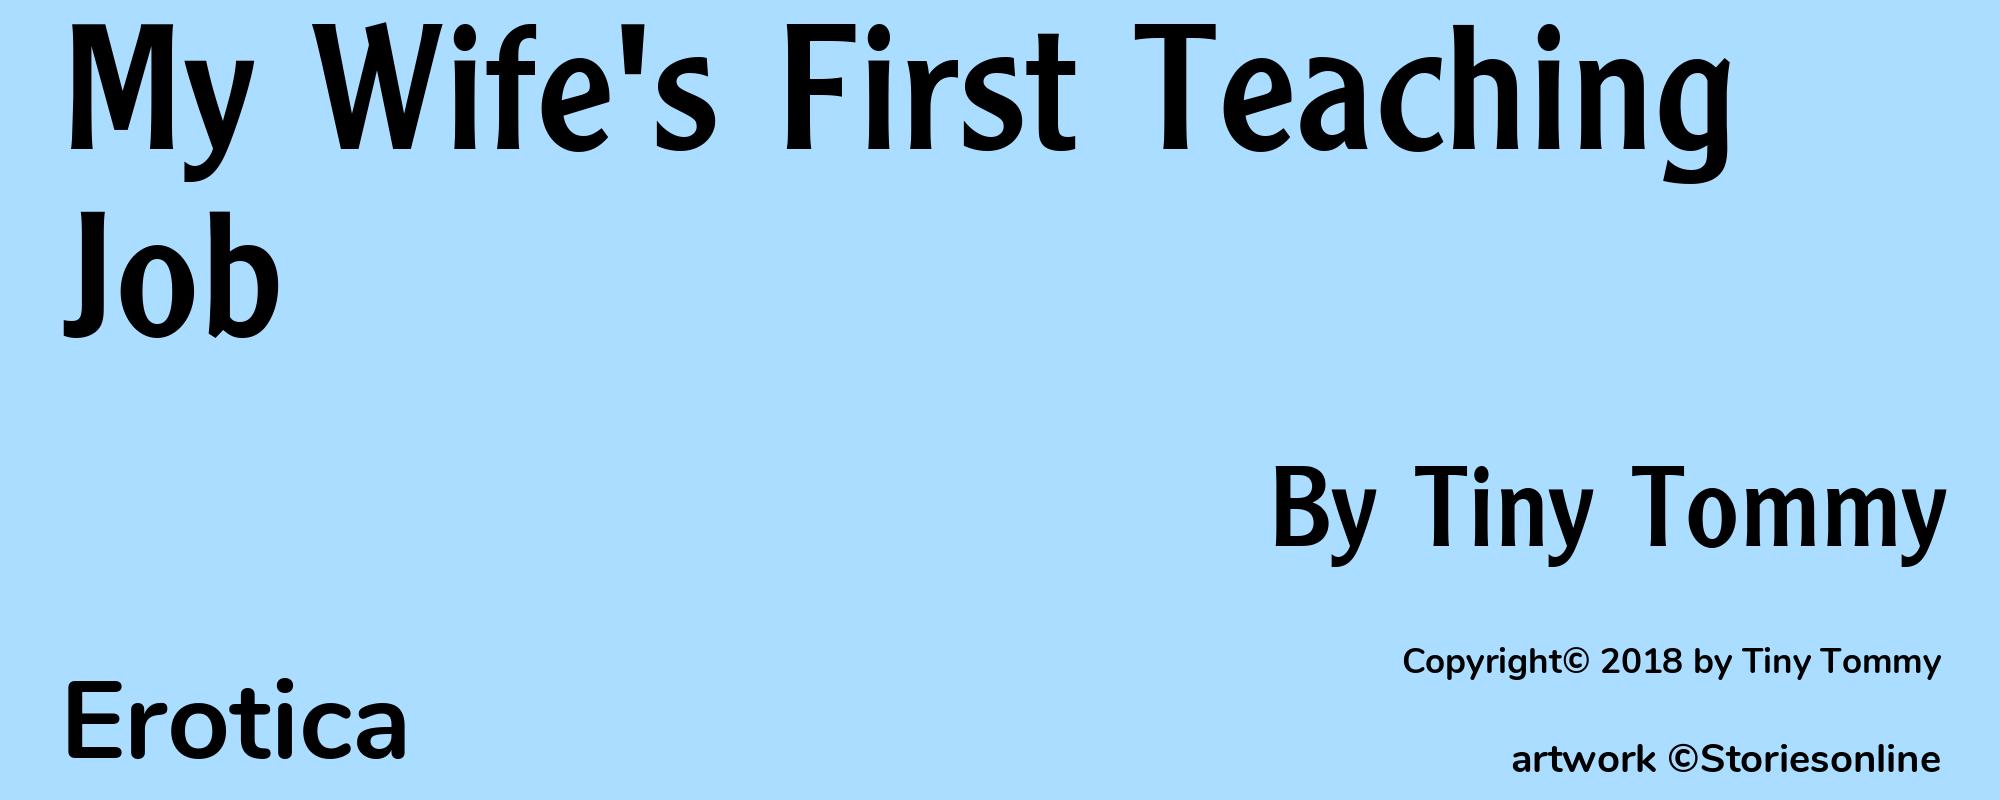 My Wife's First Teaching Job - Cover